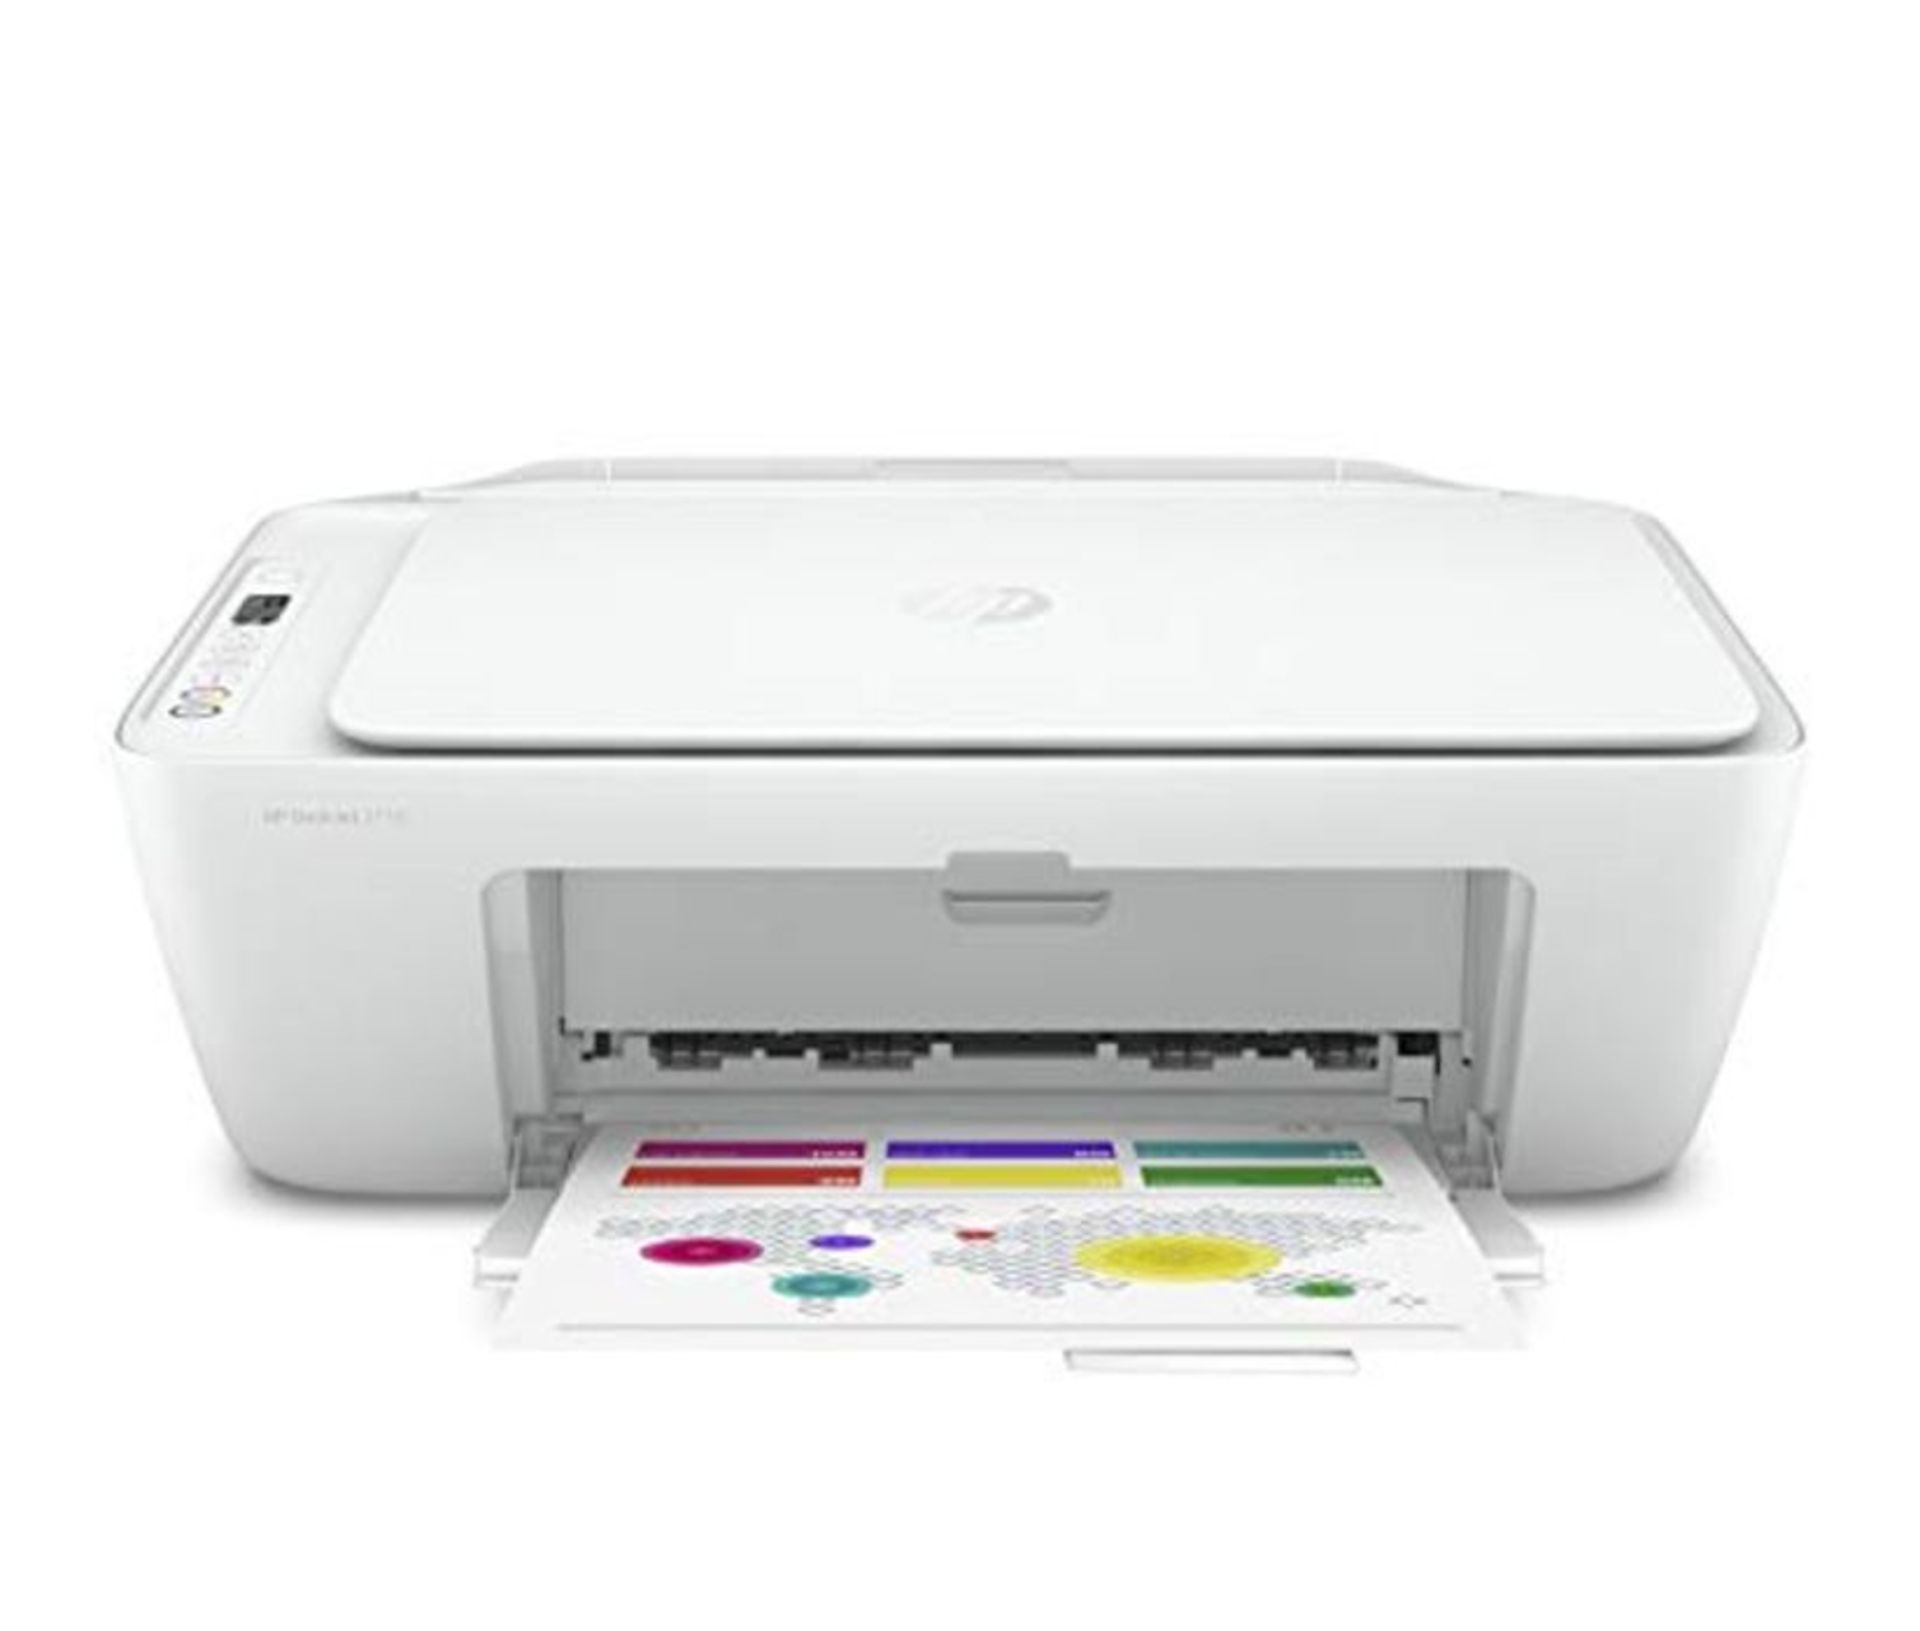 HP 5AR83B DeskJet 2710 All-in-One Printer with Wireless Printing, Instant Ink with 2 M